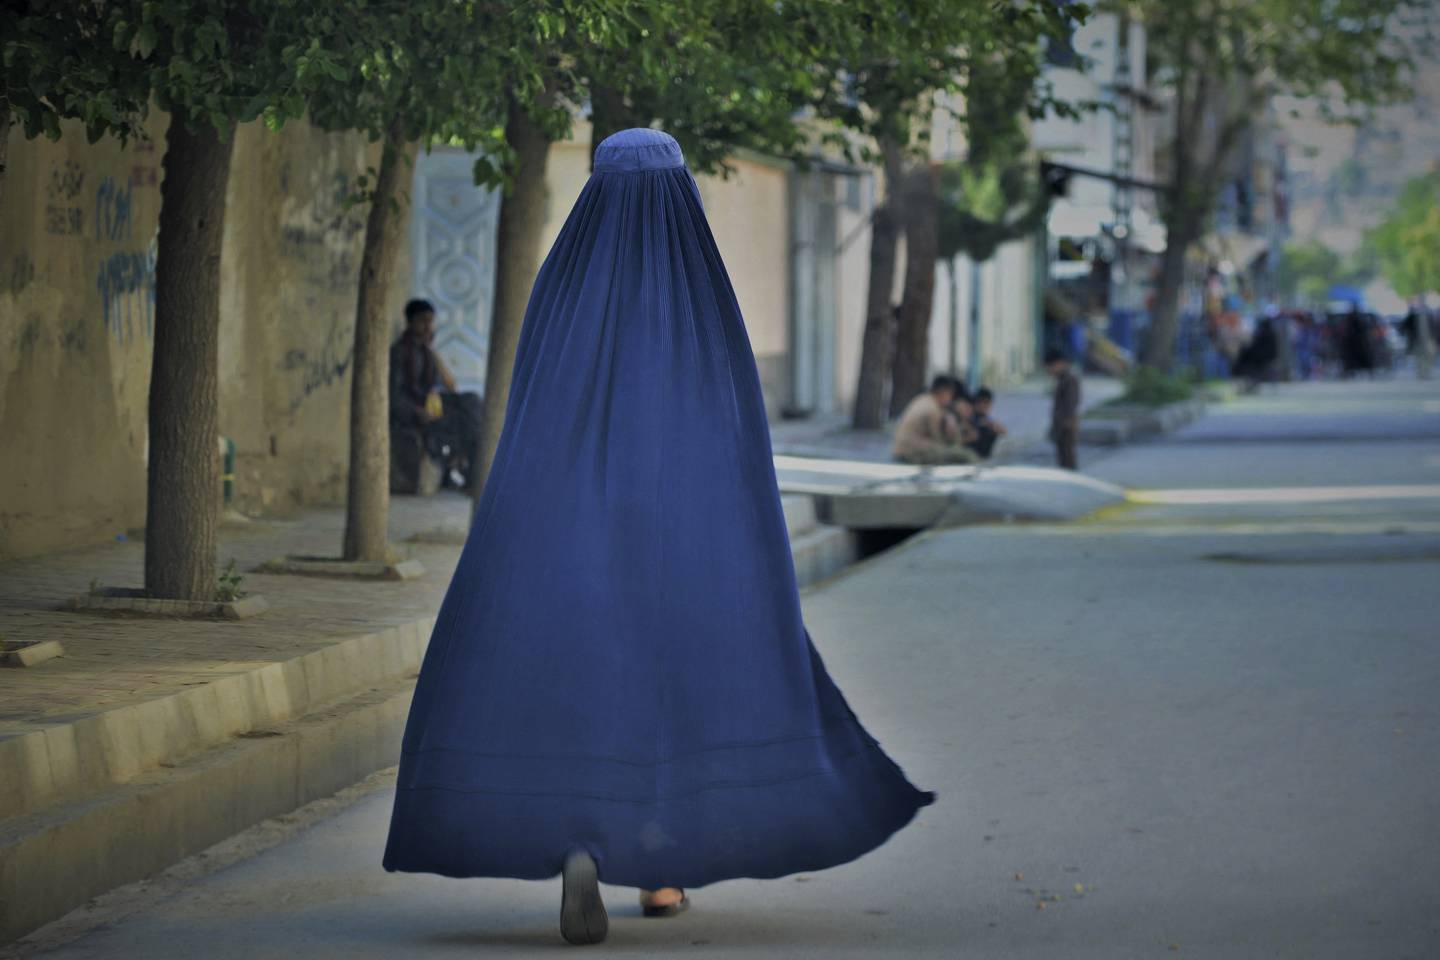 The Taliban on May 7 imposed some of the harshest restrictions on Afghanistan's women since they seized power, ordering them to cover fully in public, ideally with the traditional burqa. AFP